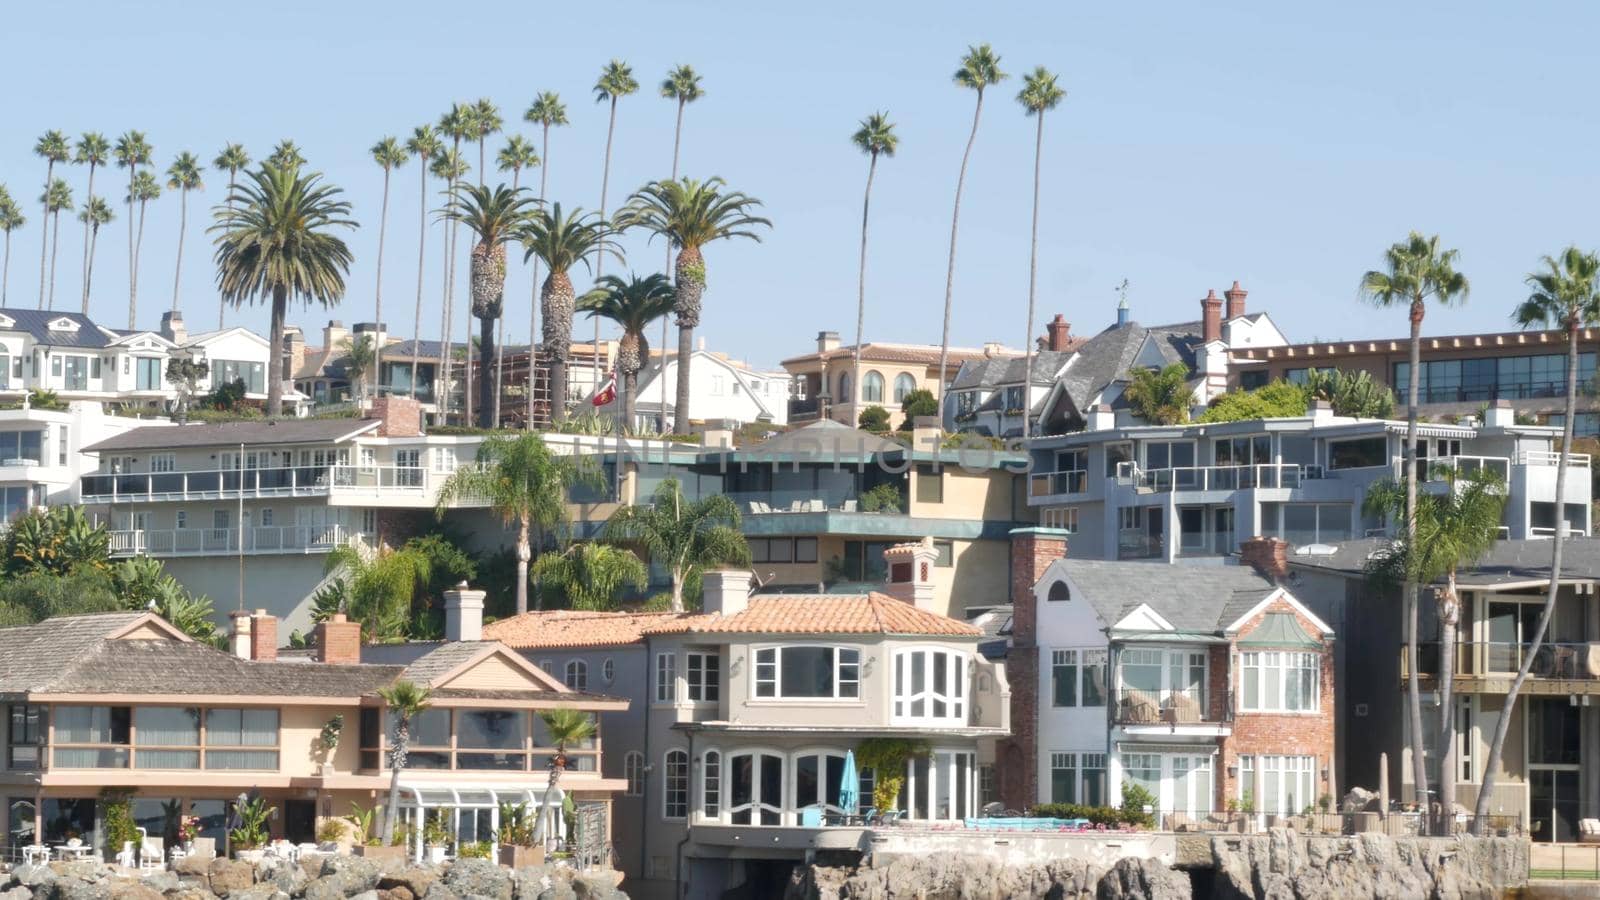 Luxury property, beachfront real estate on pacific ocean coast, Newport beach harbor, California, USA. Weekend premium seafront rental homes near Los Angeles. Vacation rich suburban waterfront houses by DogoraSun